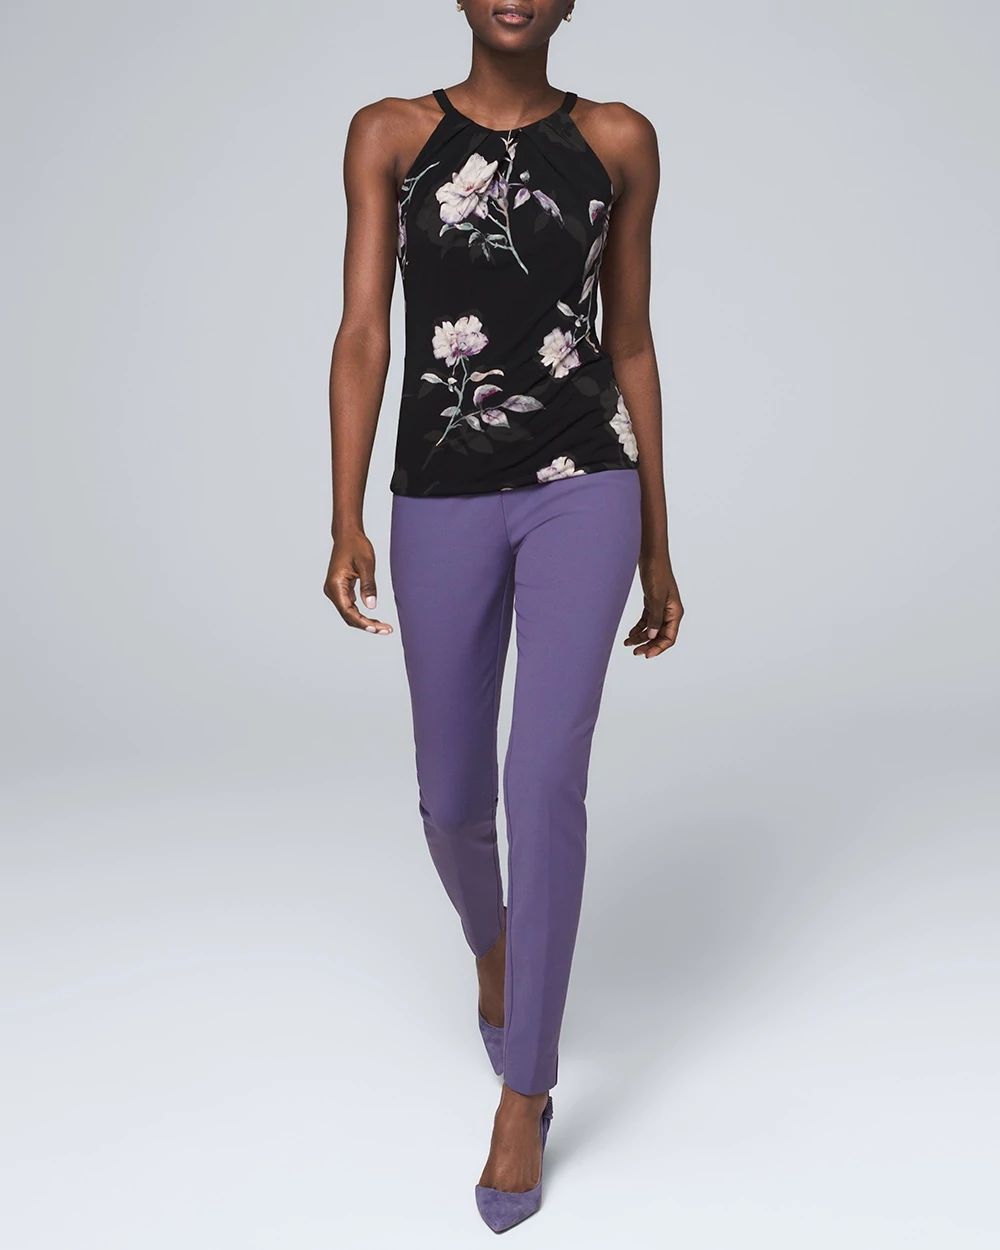 Abstract Floral-Print Sleeveless Top click to view larger image.